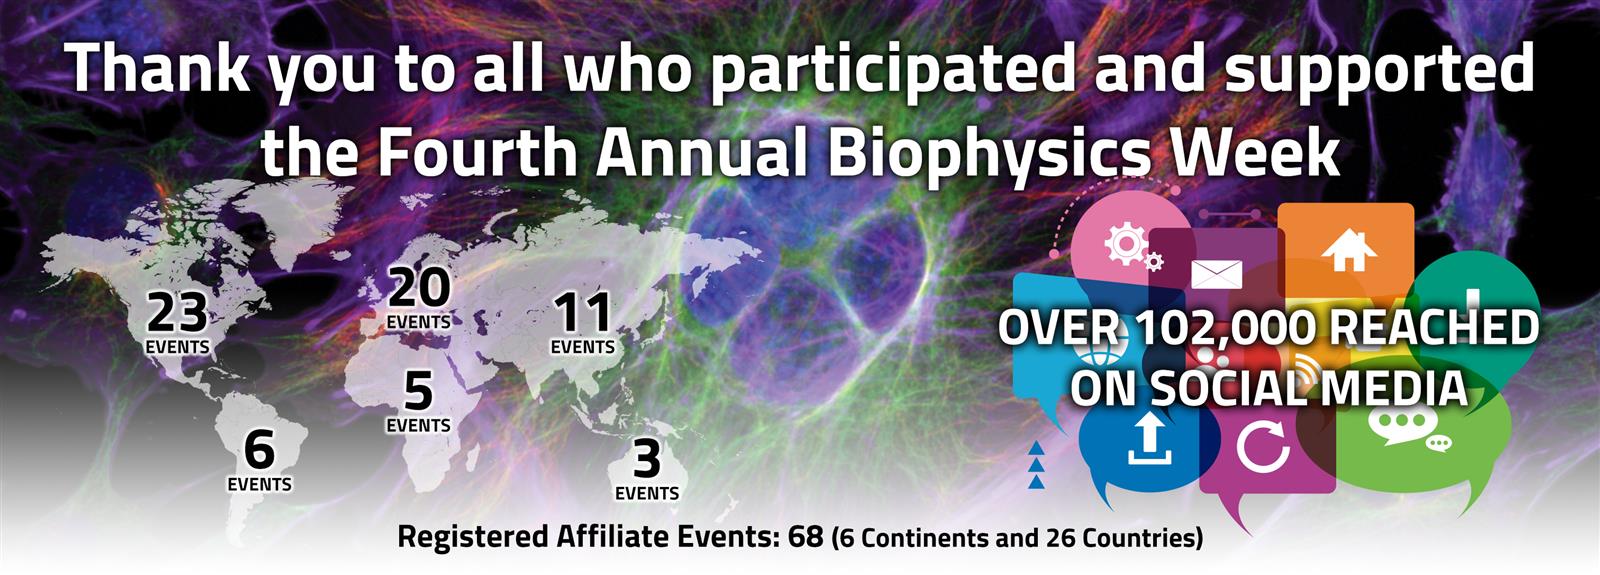 Thank You to All Who Participated and Supported the Fourth Annual Biophysics Week